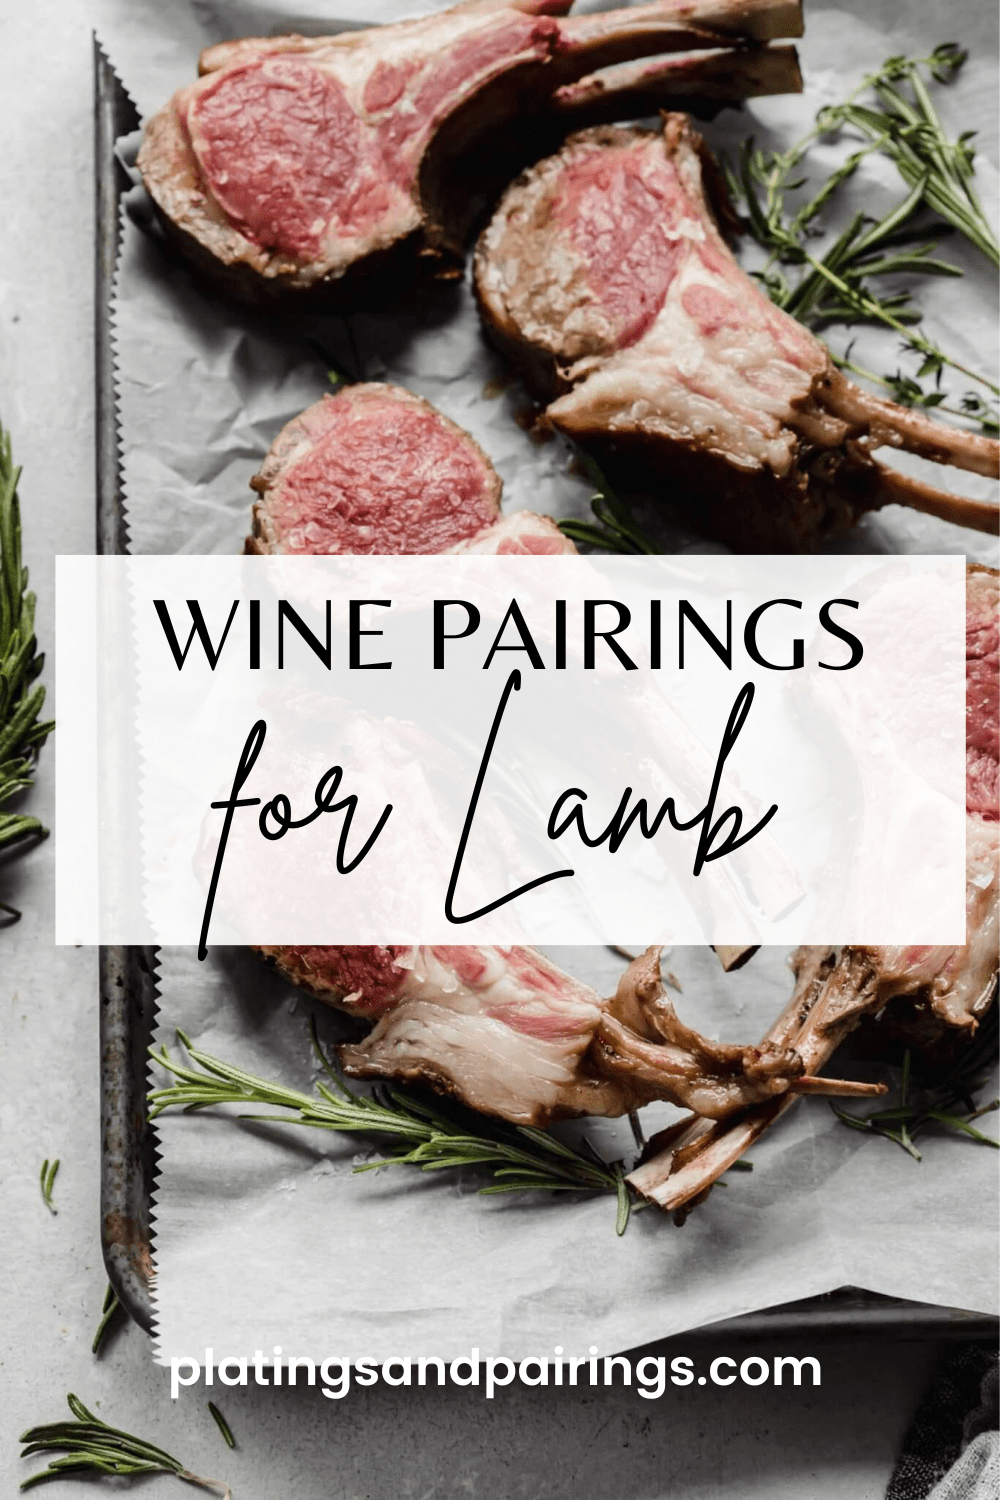 Lamb chops with text overlay of wine pairings for lamb